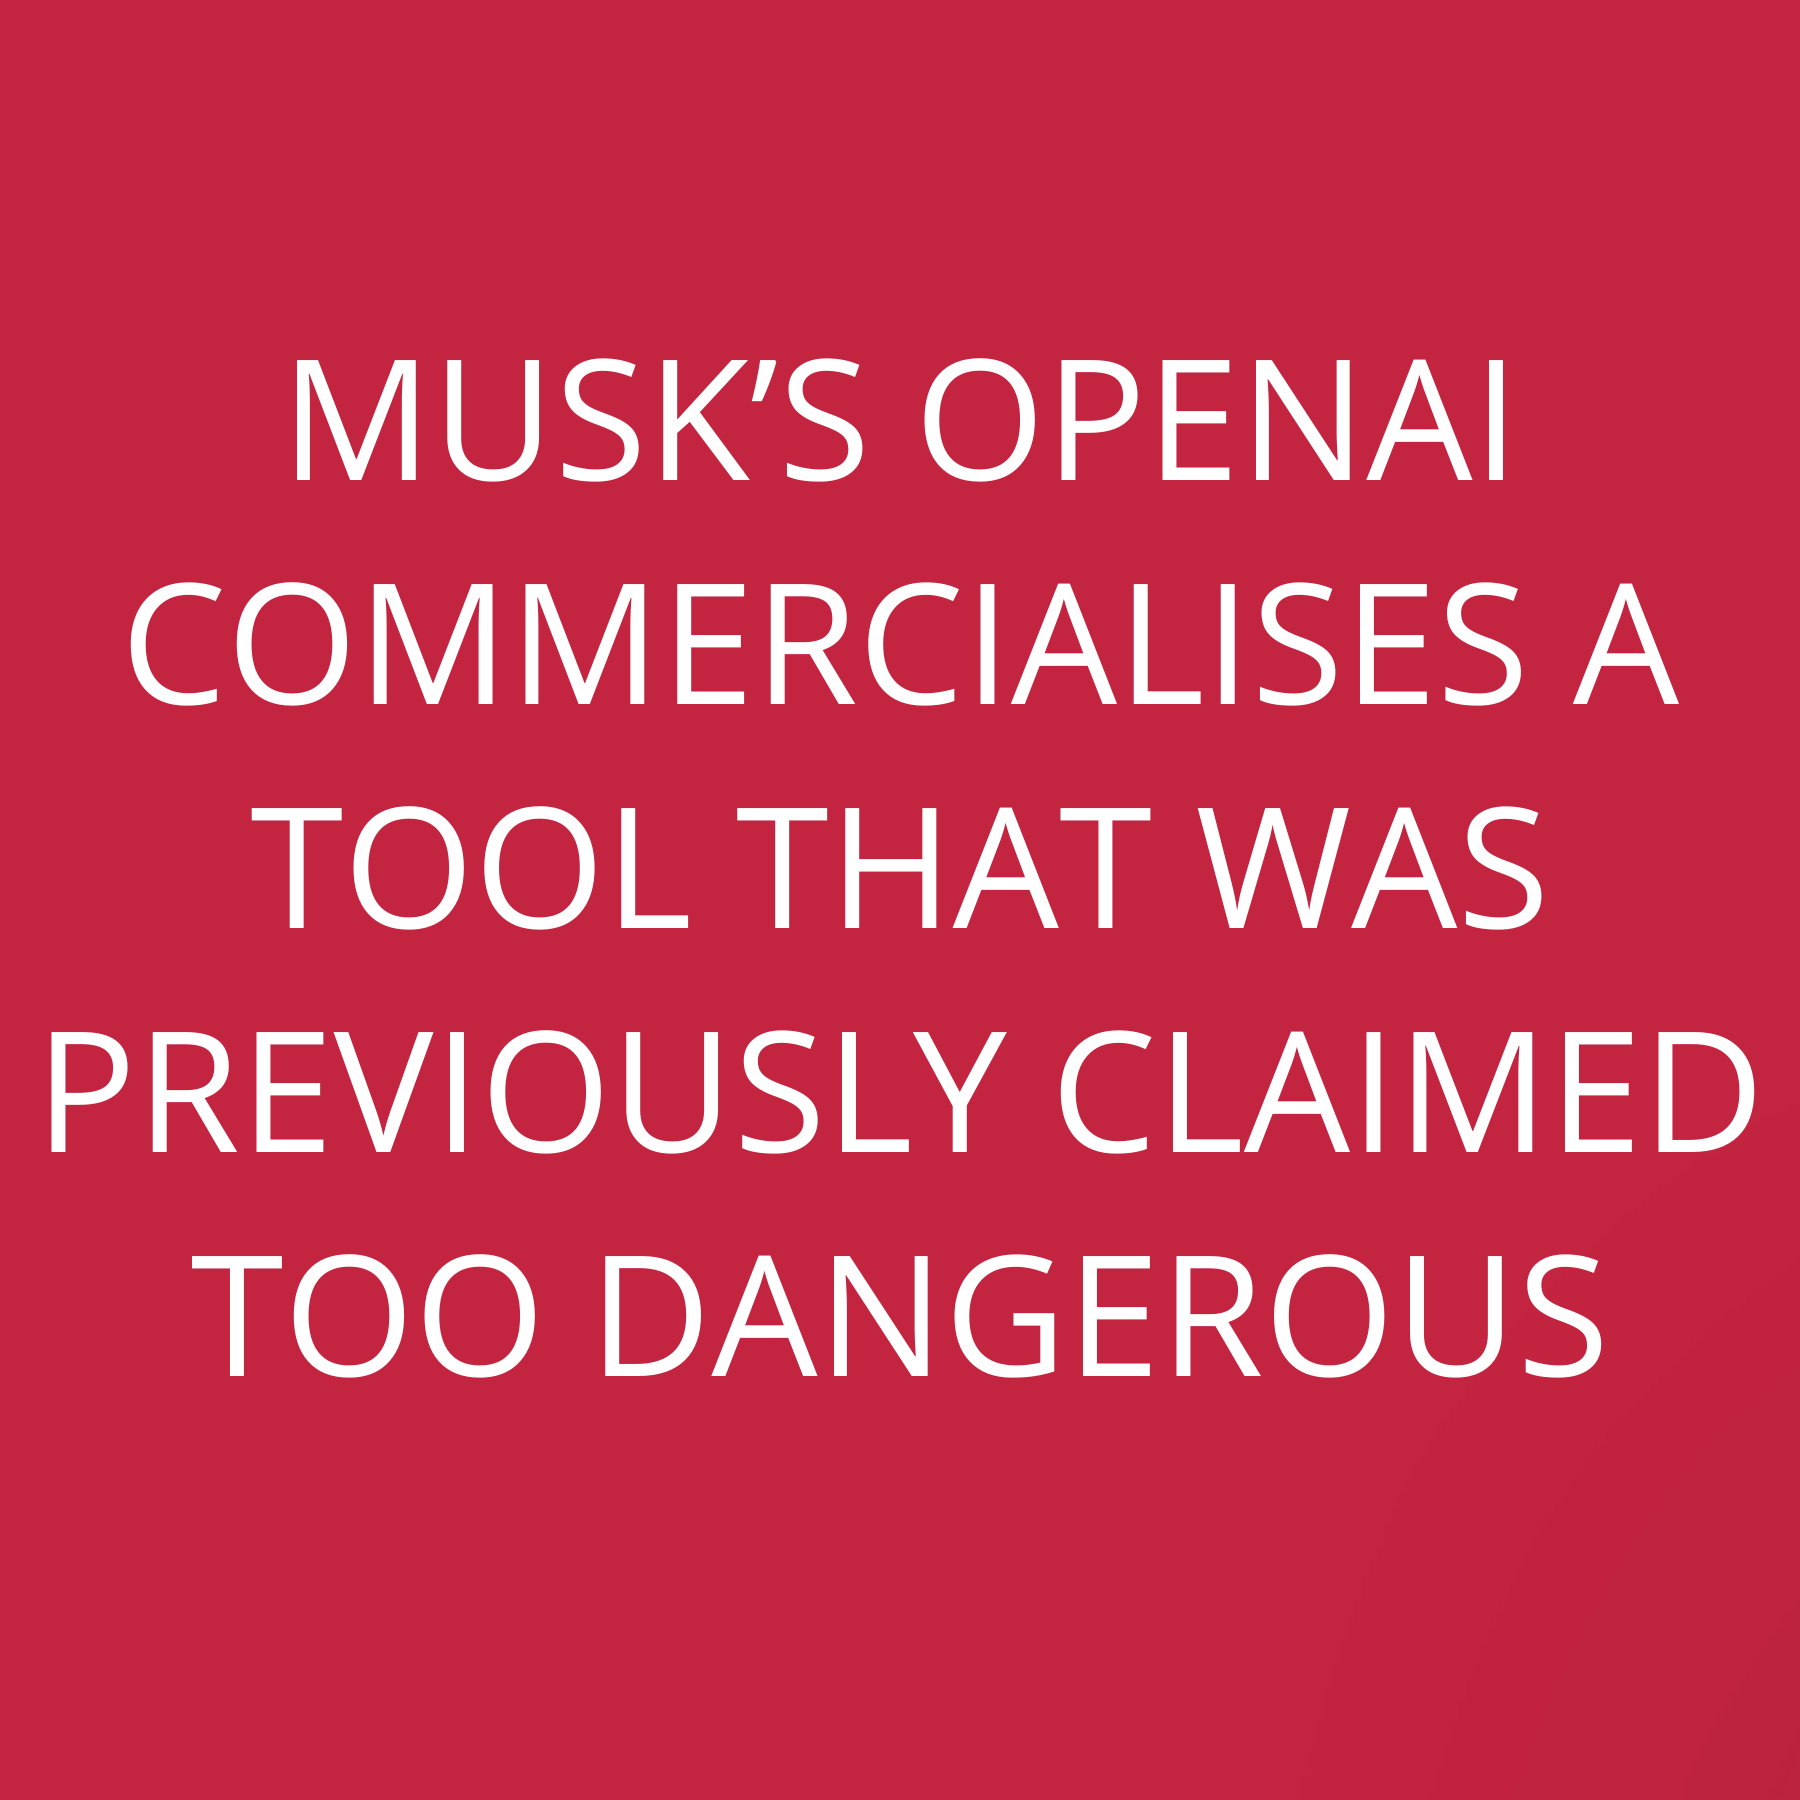 Musk’s OpenAi commercialises a tool that was previously claimed too dangerous